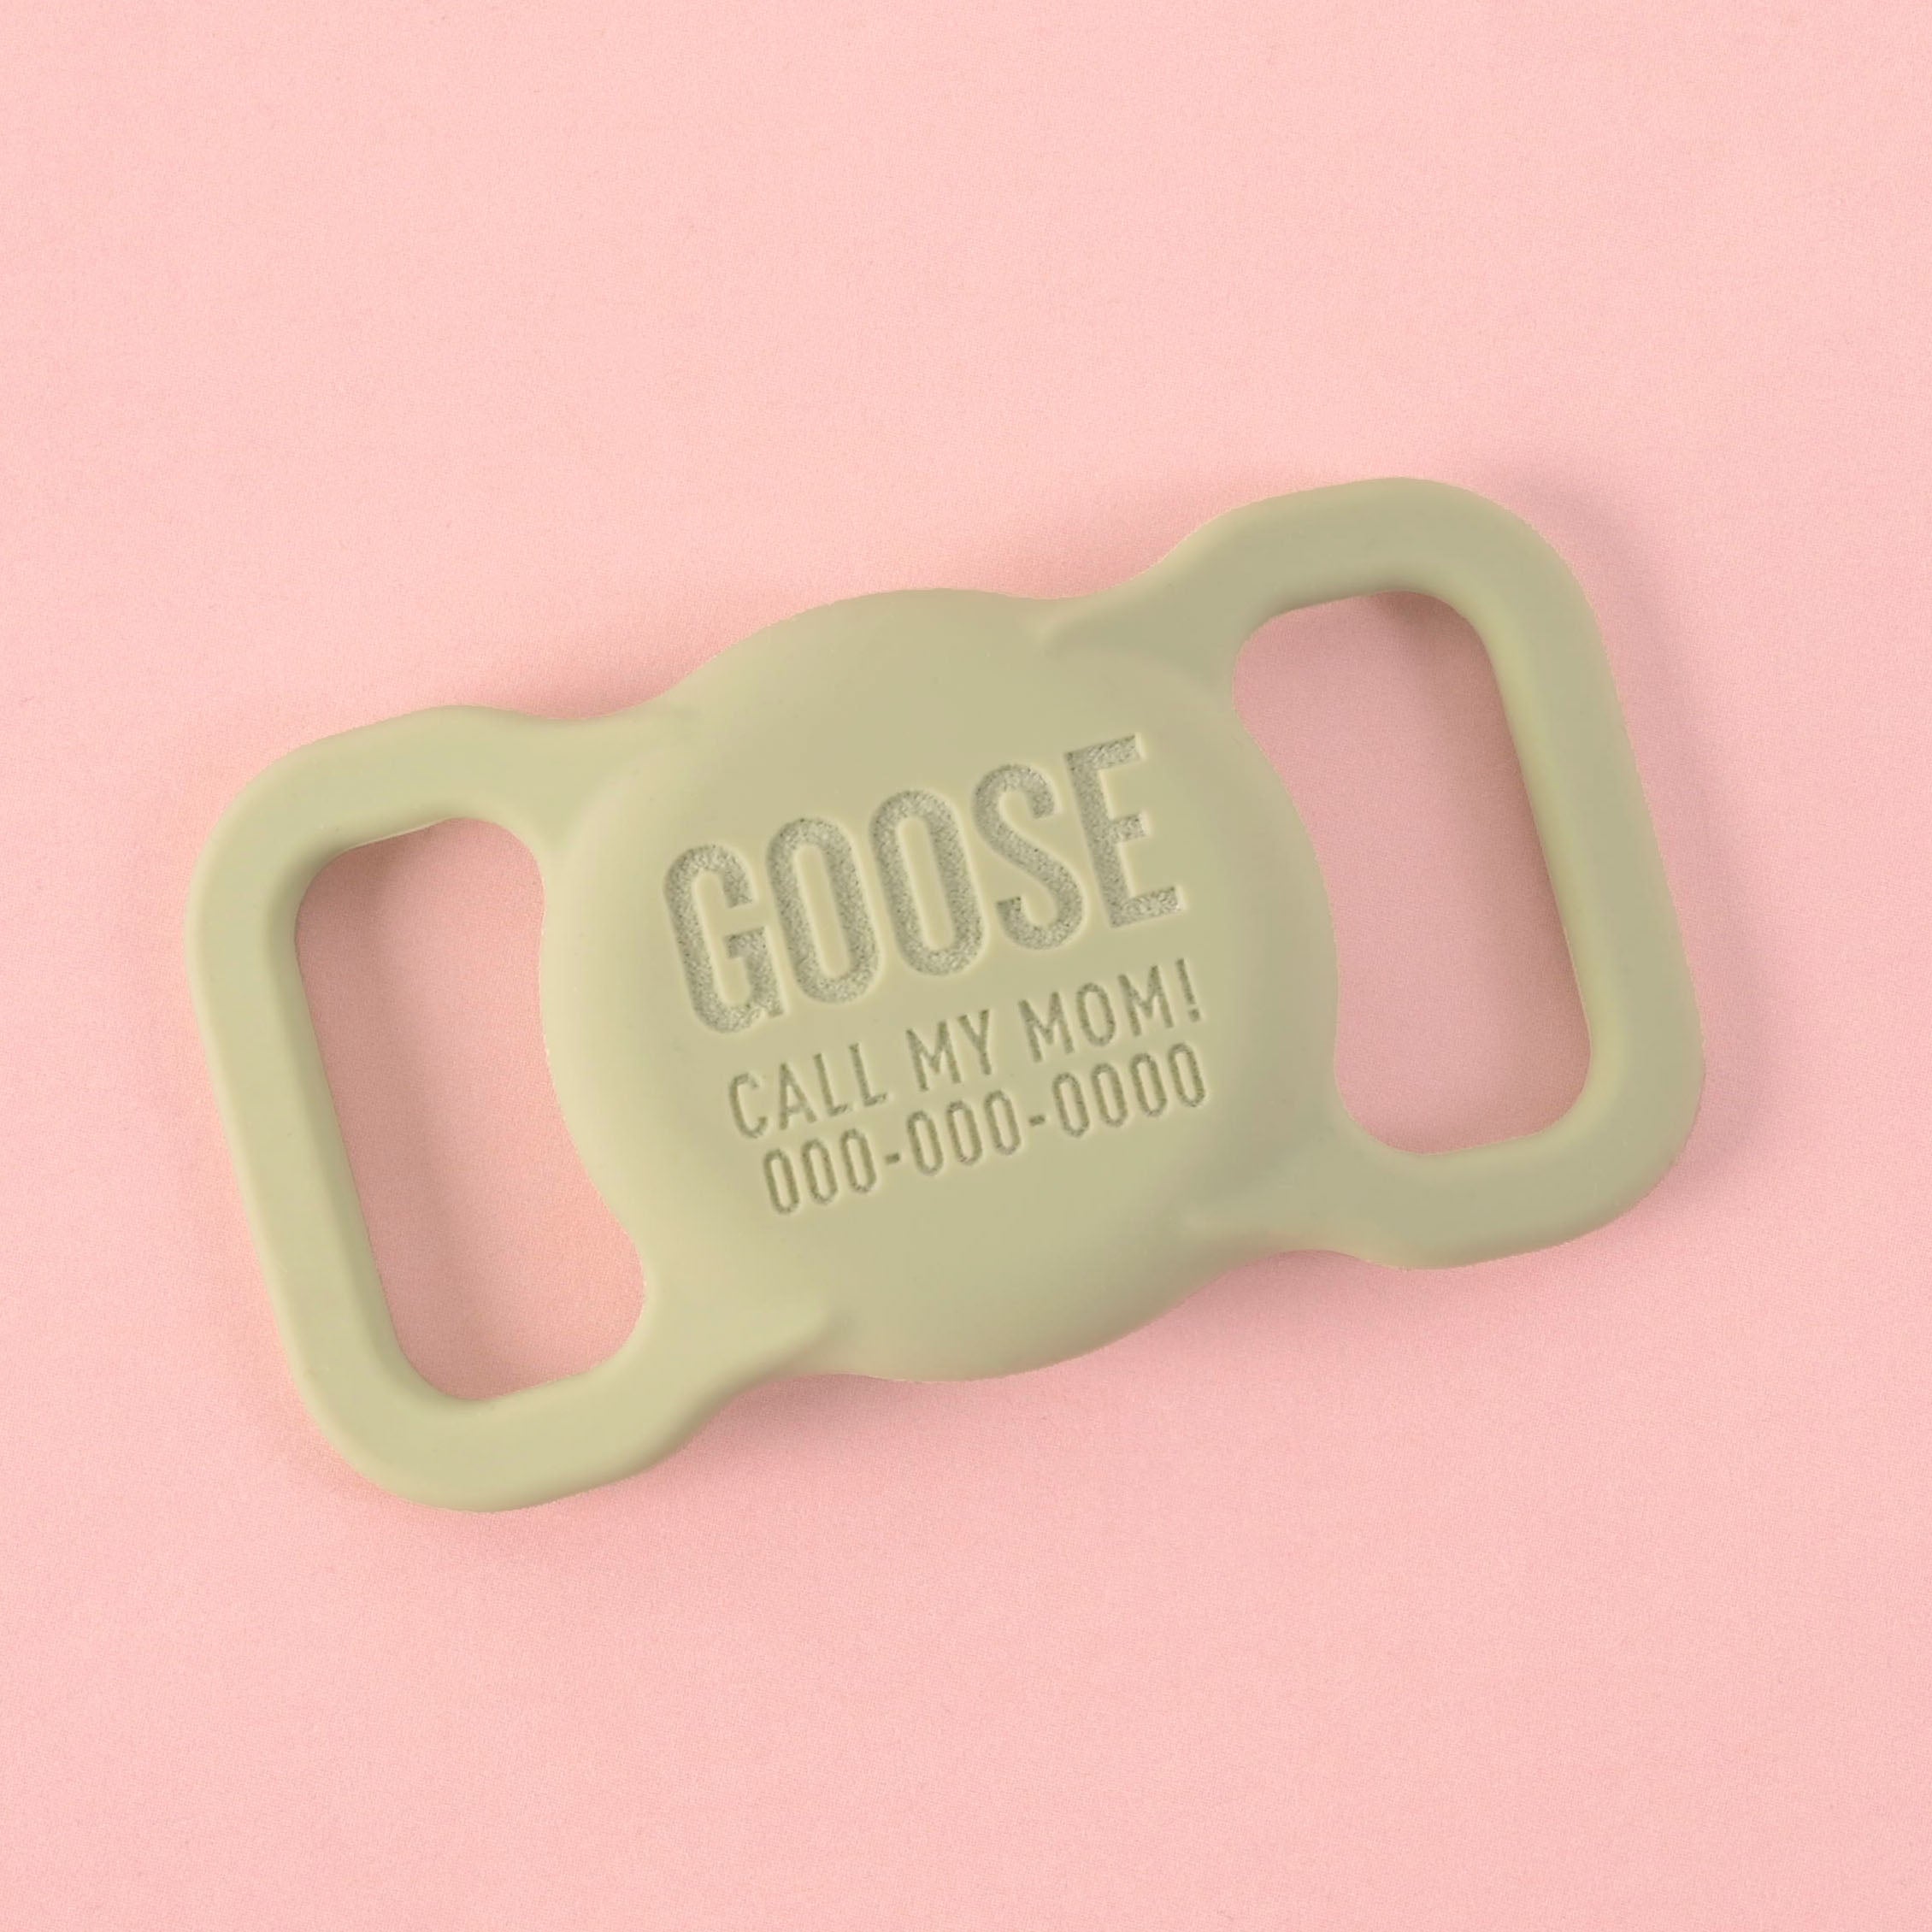 Slide-on Personalized Pet Tag, AirTag holder